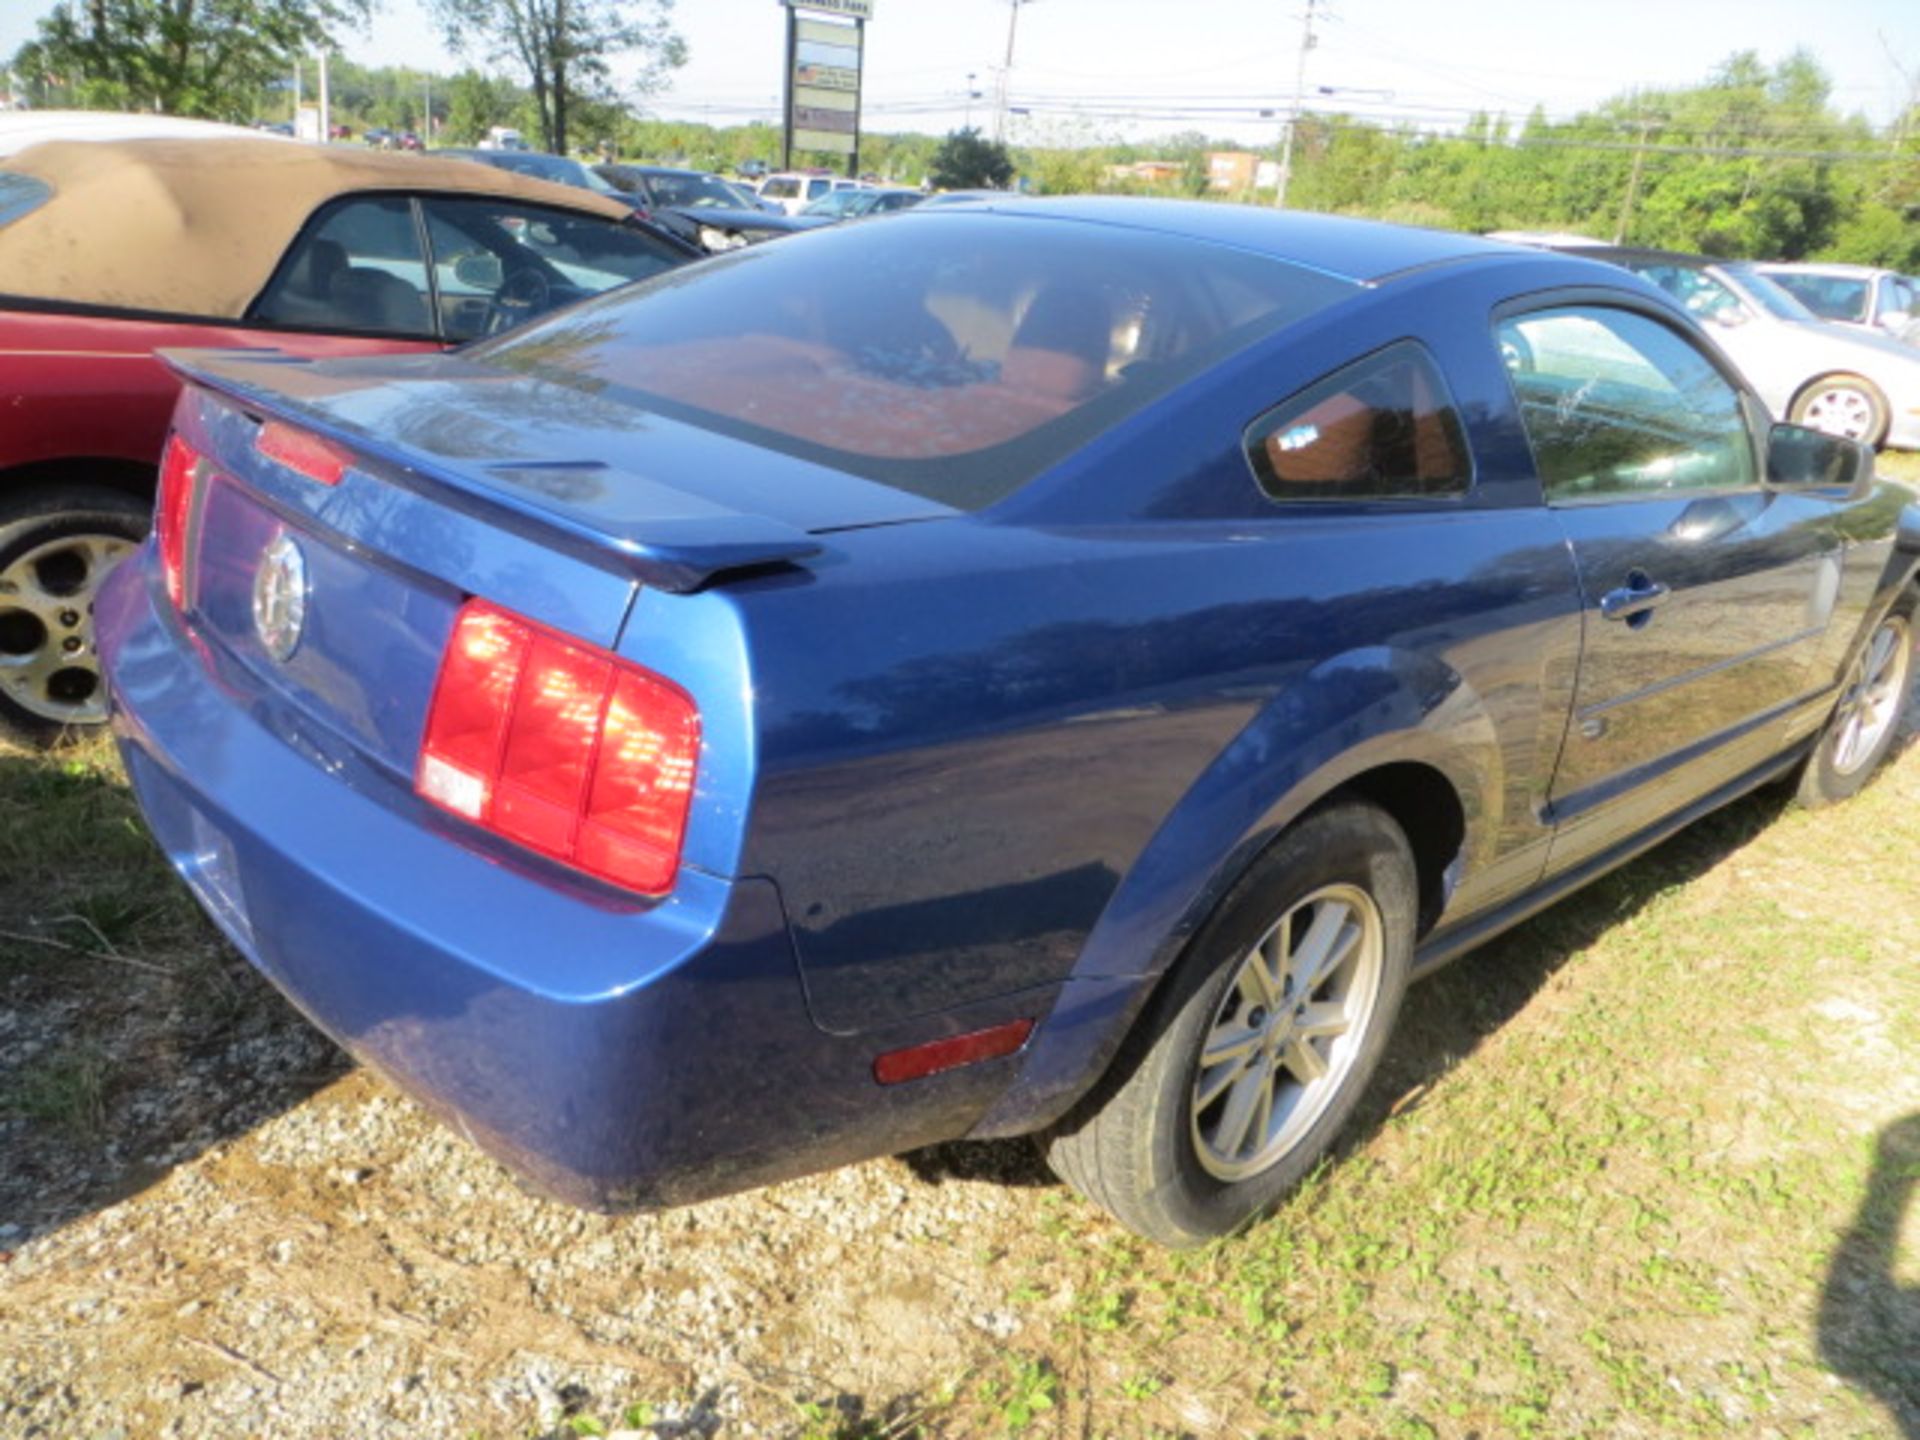 2008 Ford Mustang-NEEDS ALIGNMENT 115000 MILES,VIN 1ZVHT80N385181367, SOLD WITH TRANSFERABLE TITLE - Image 3 of 3